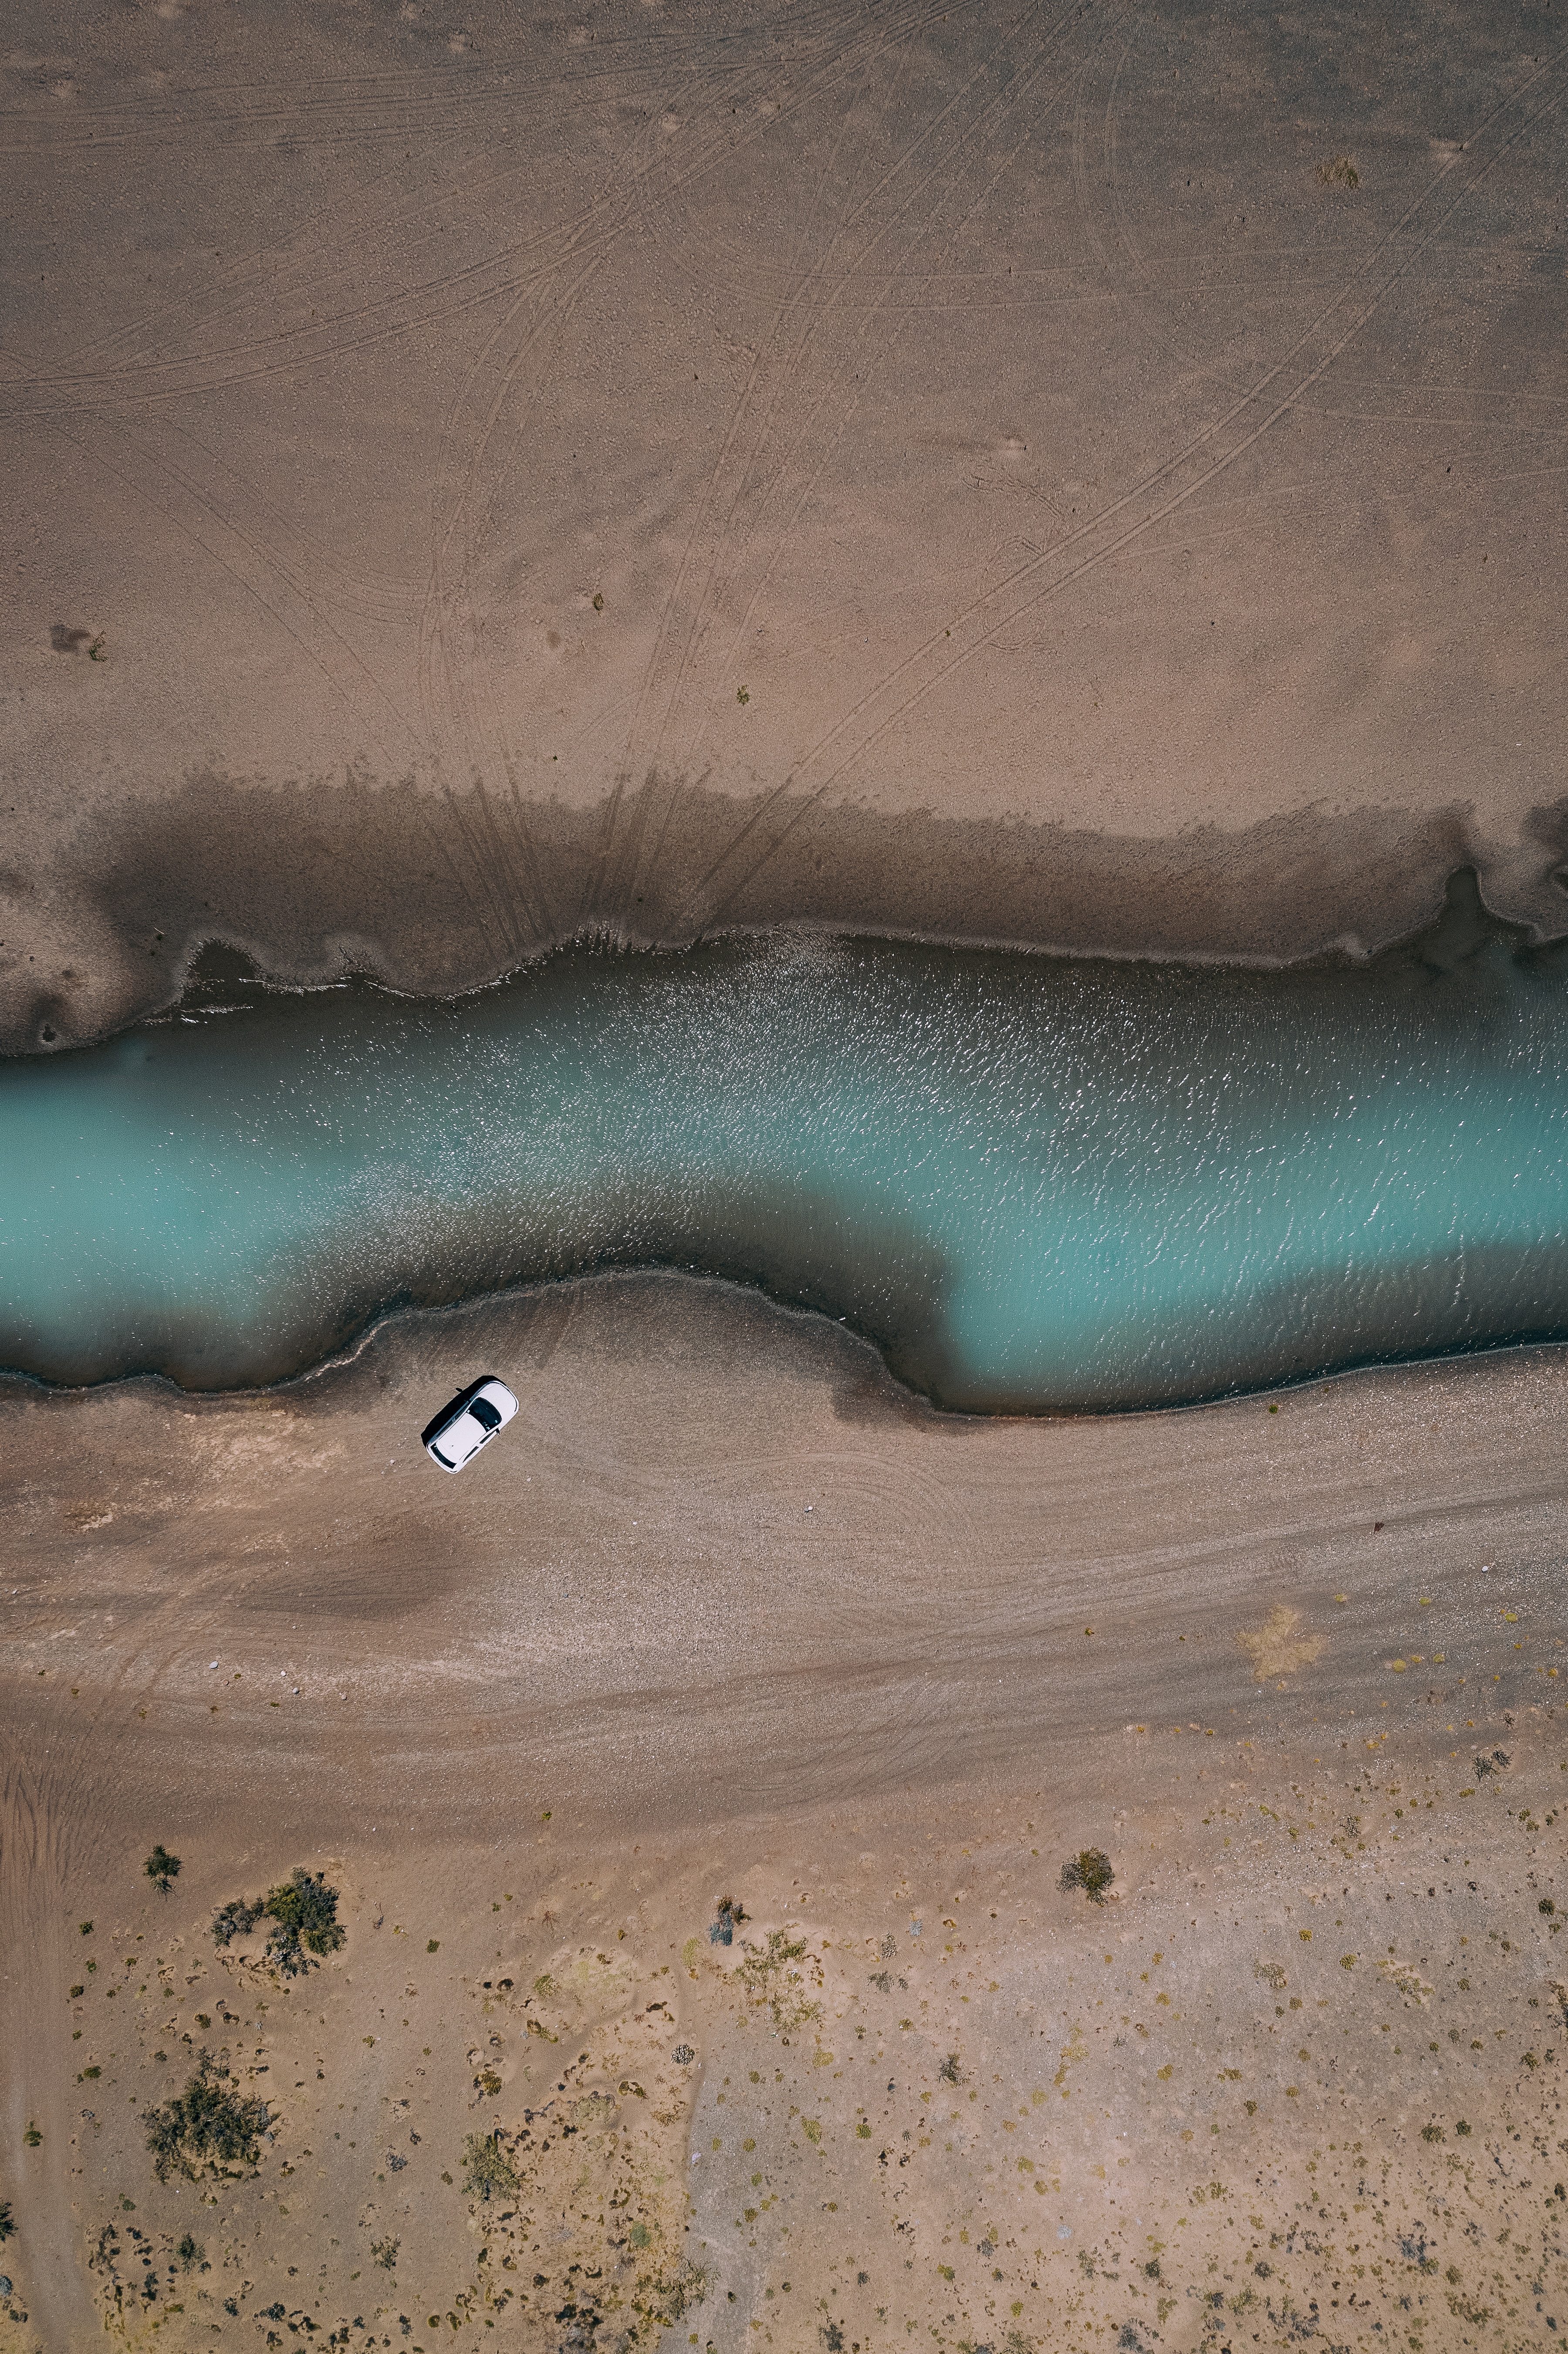 rivers, bank, sand, cars, view from above, shore, car, machine